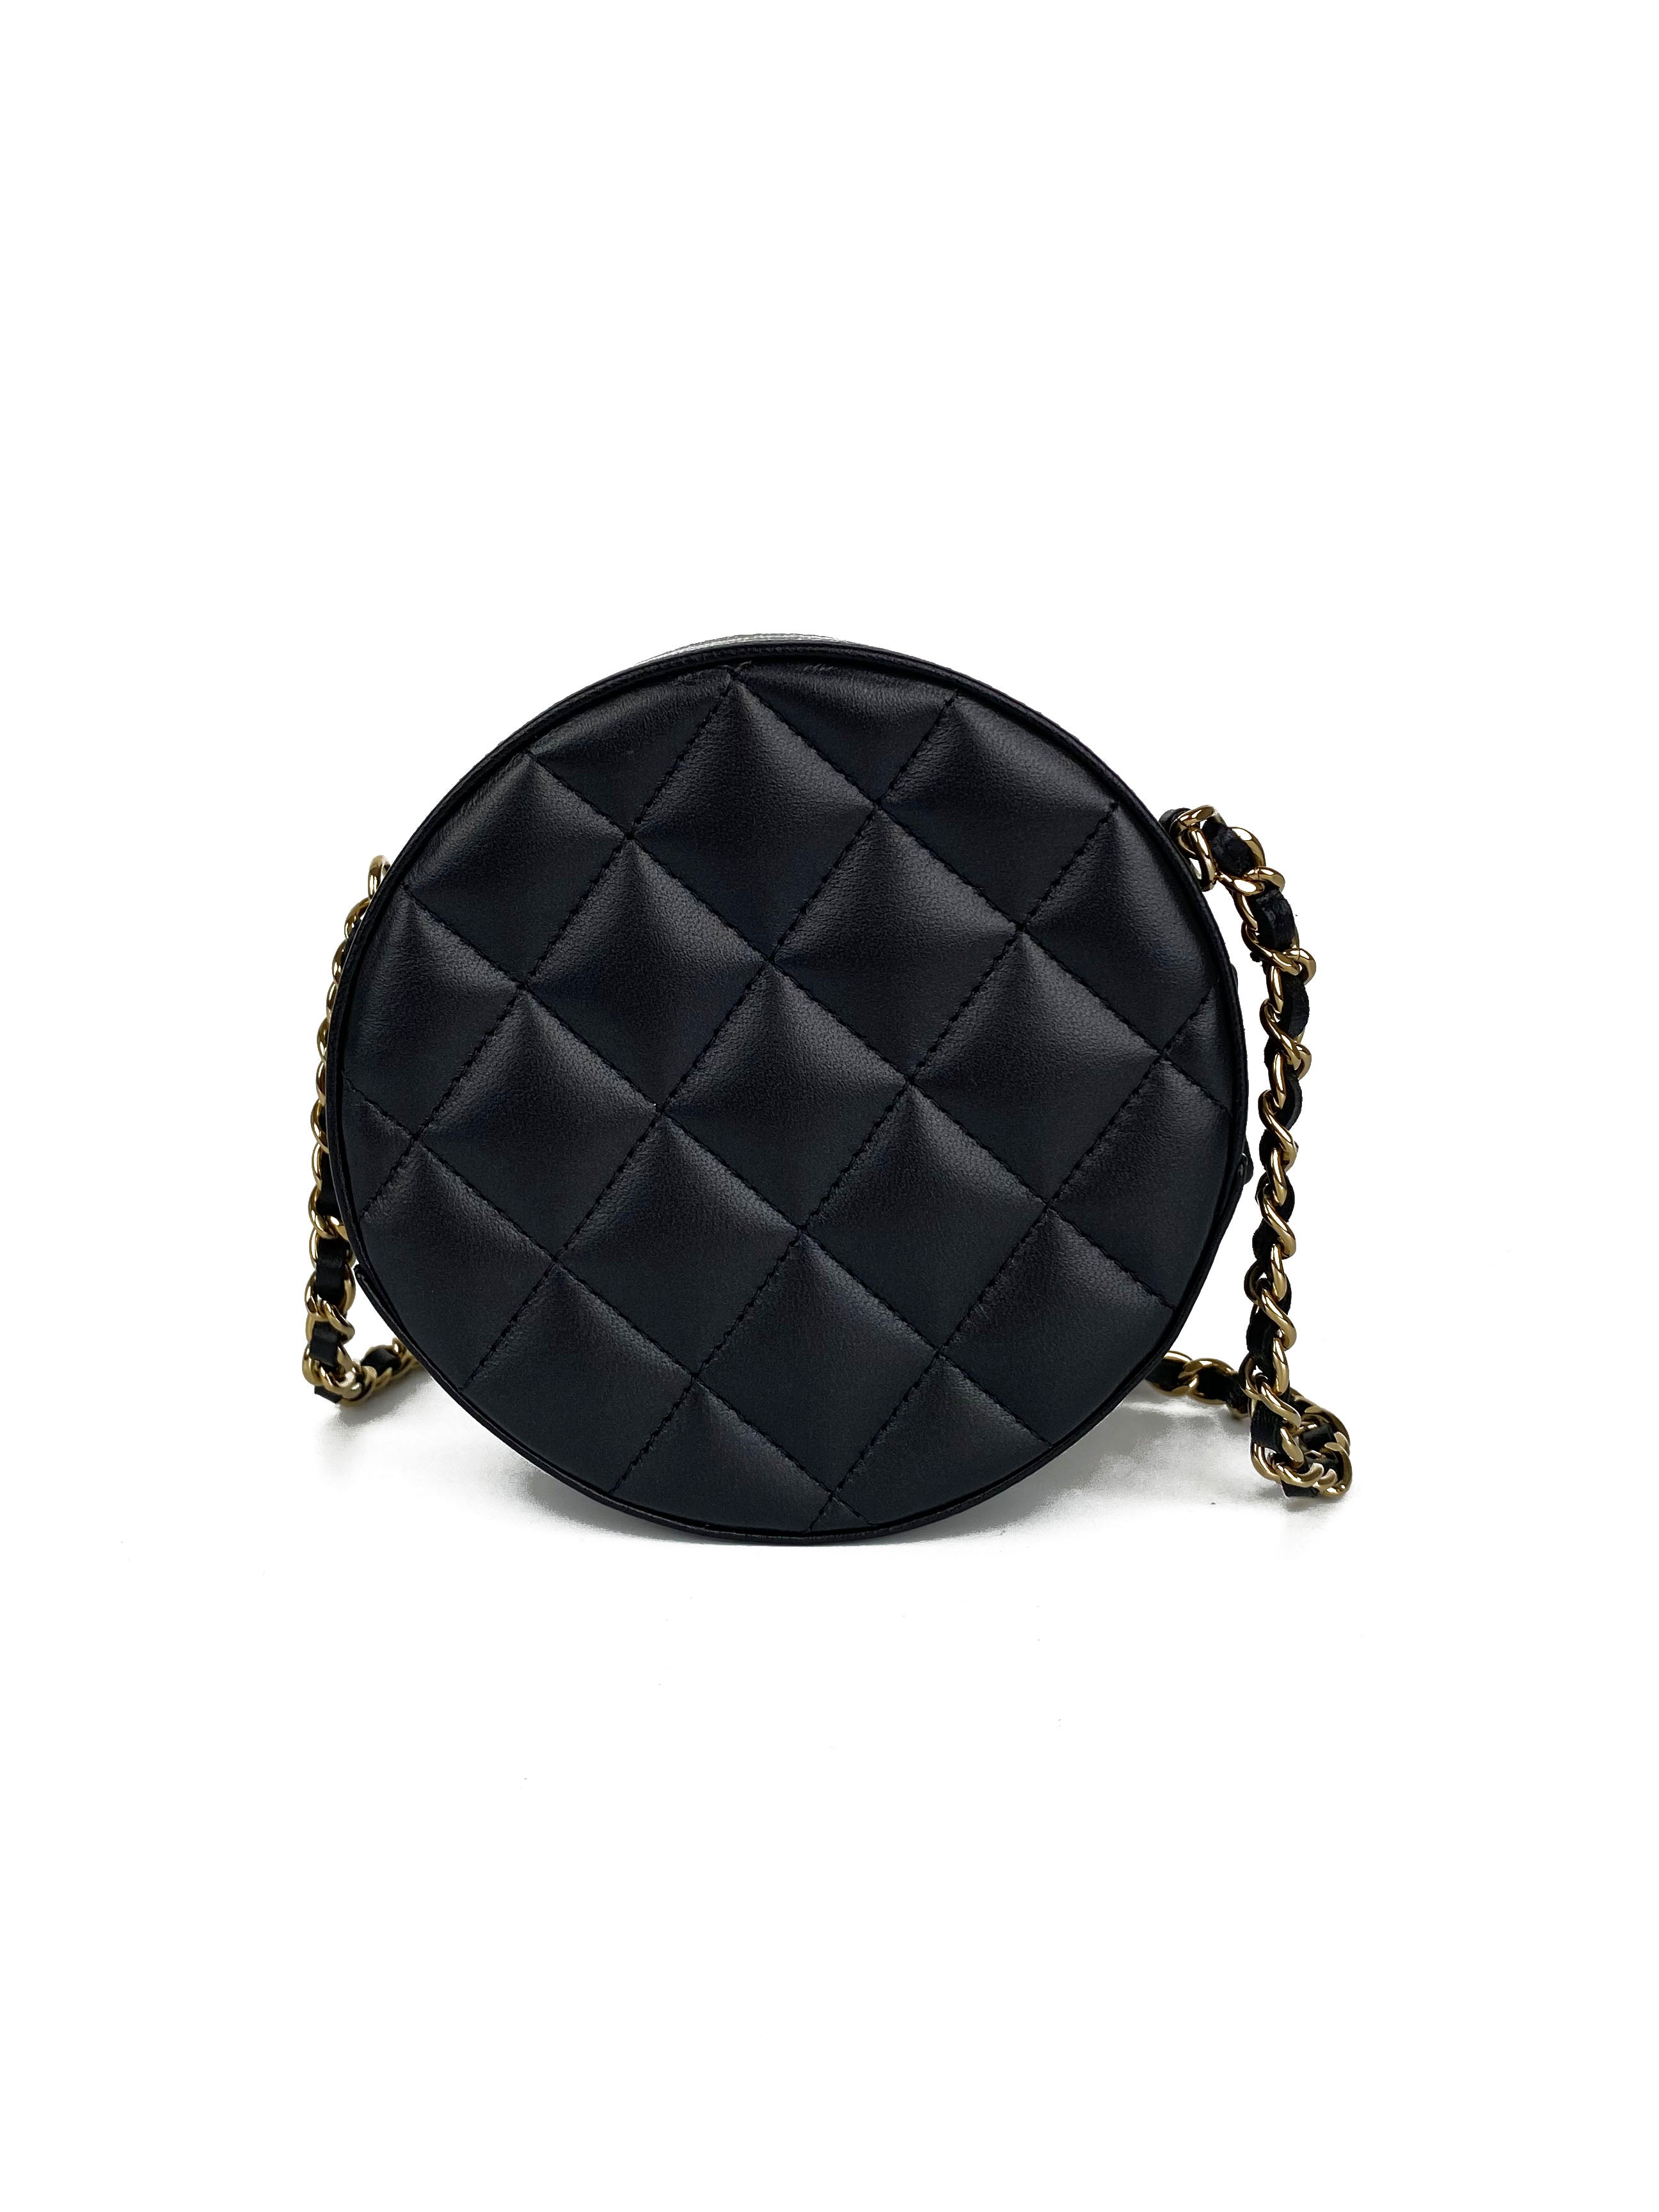 Chanel Black Round Shoulder Bag with Bow